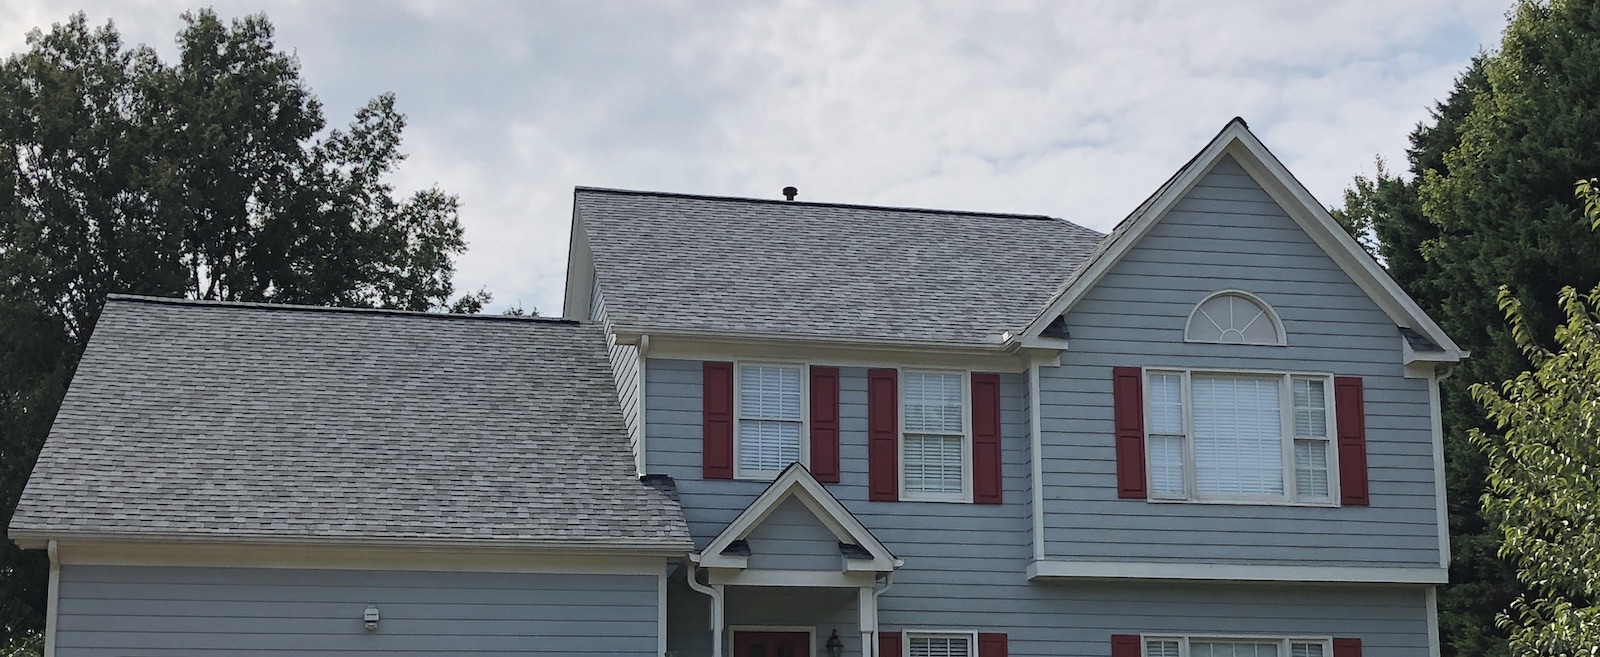 Local roofing companies professional roof installation on a home. Owens Corning roof.